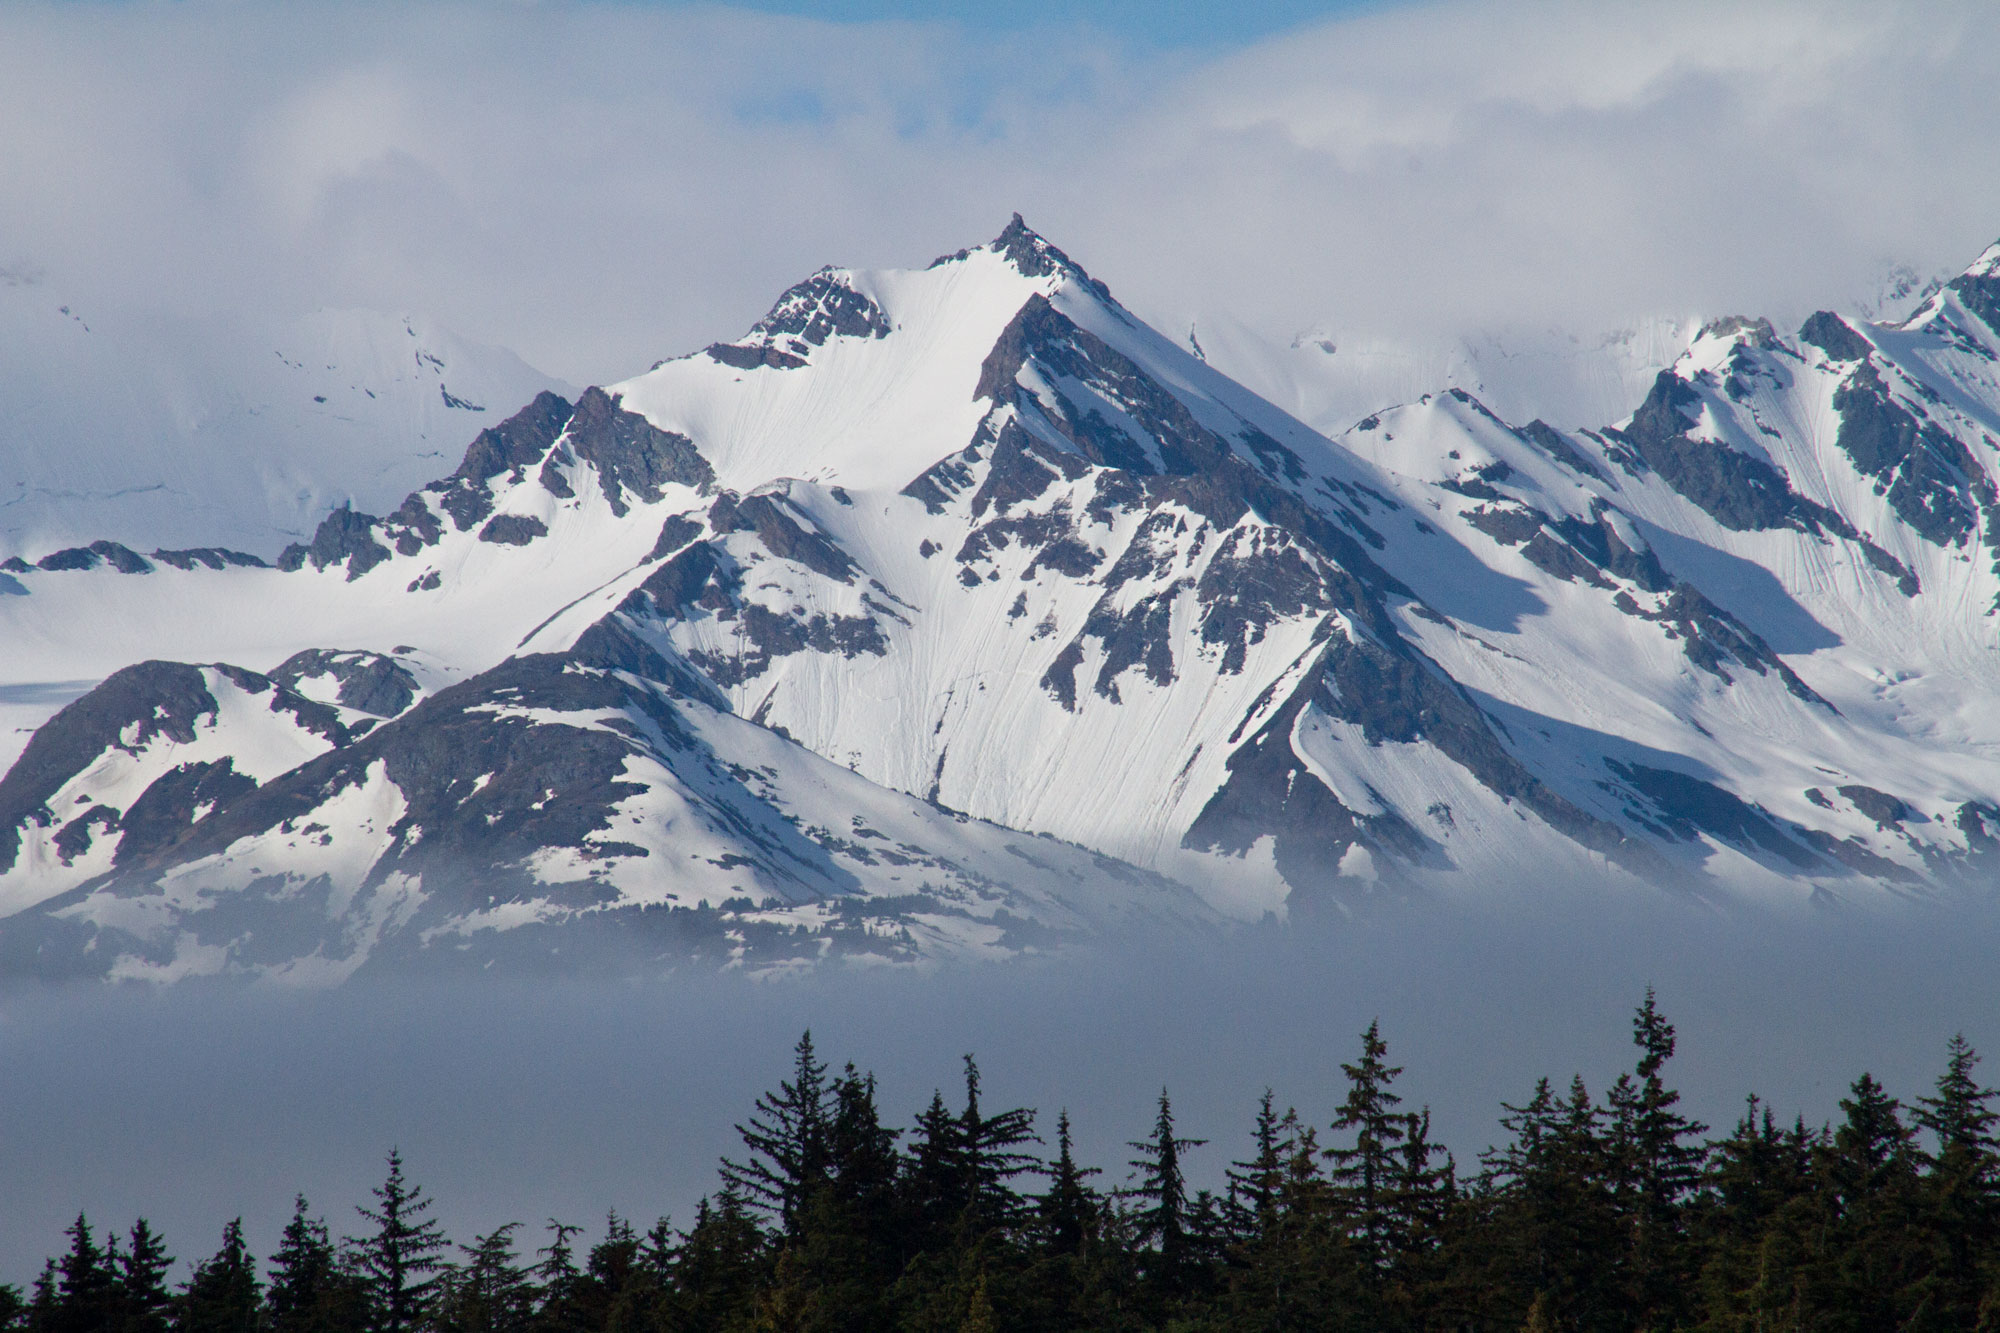 The mountains by Haines, Alaska